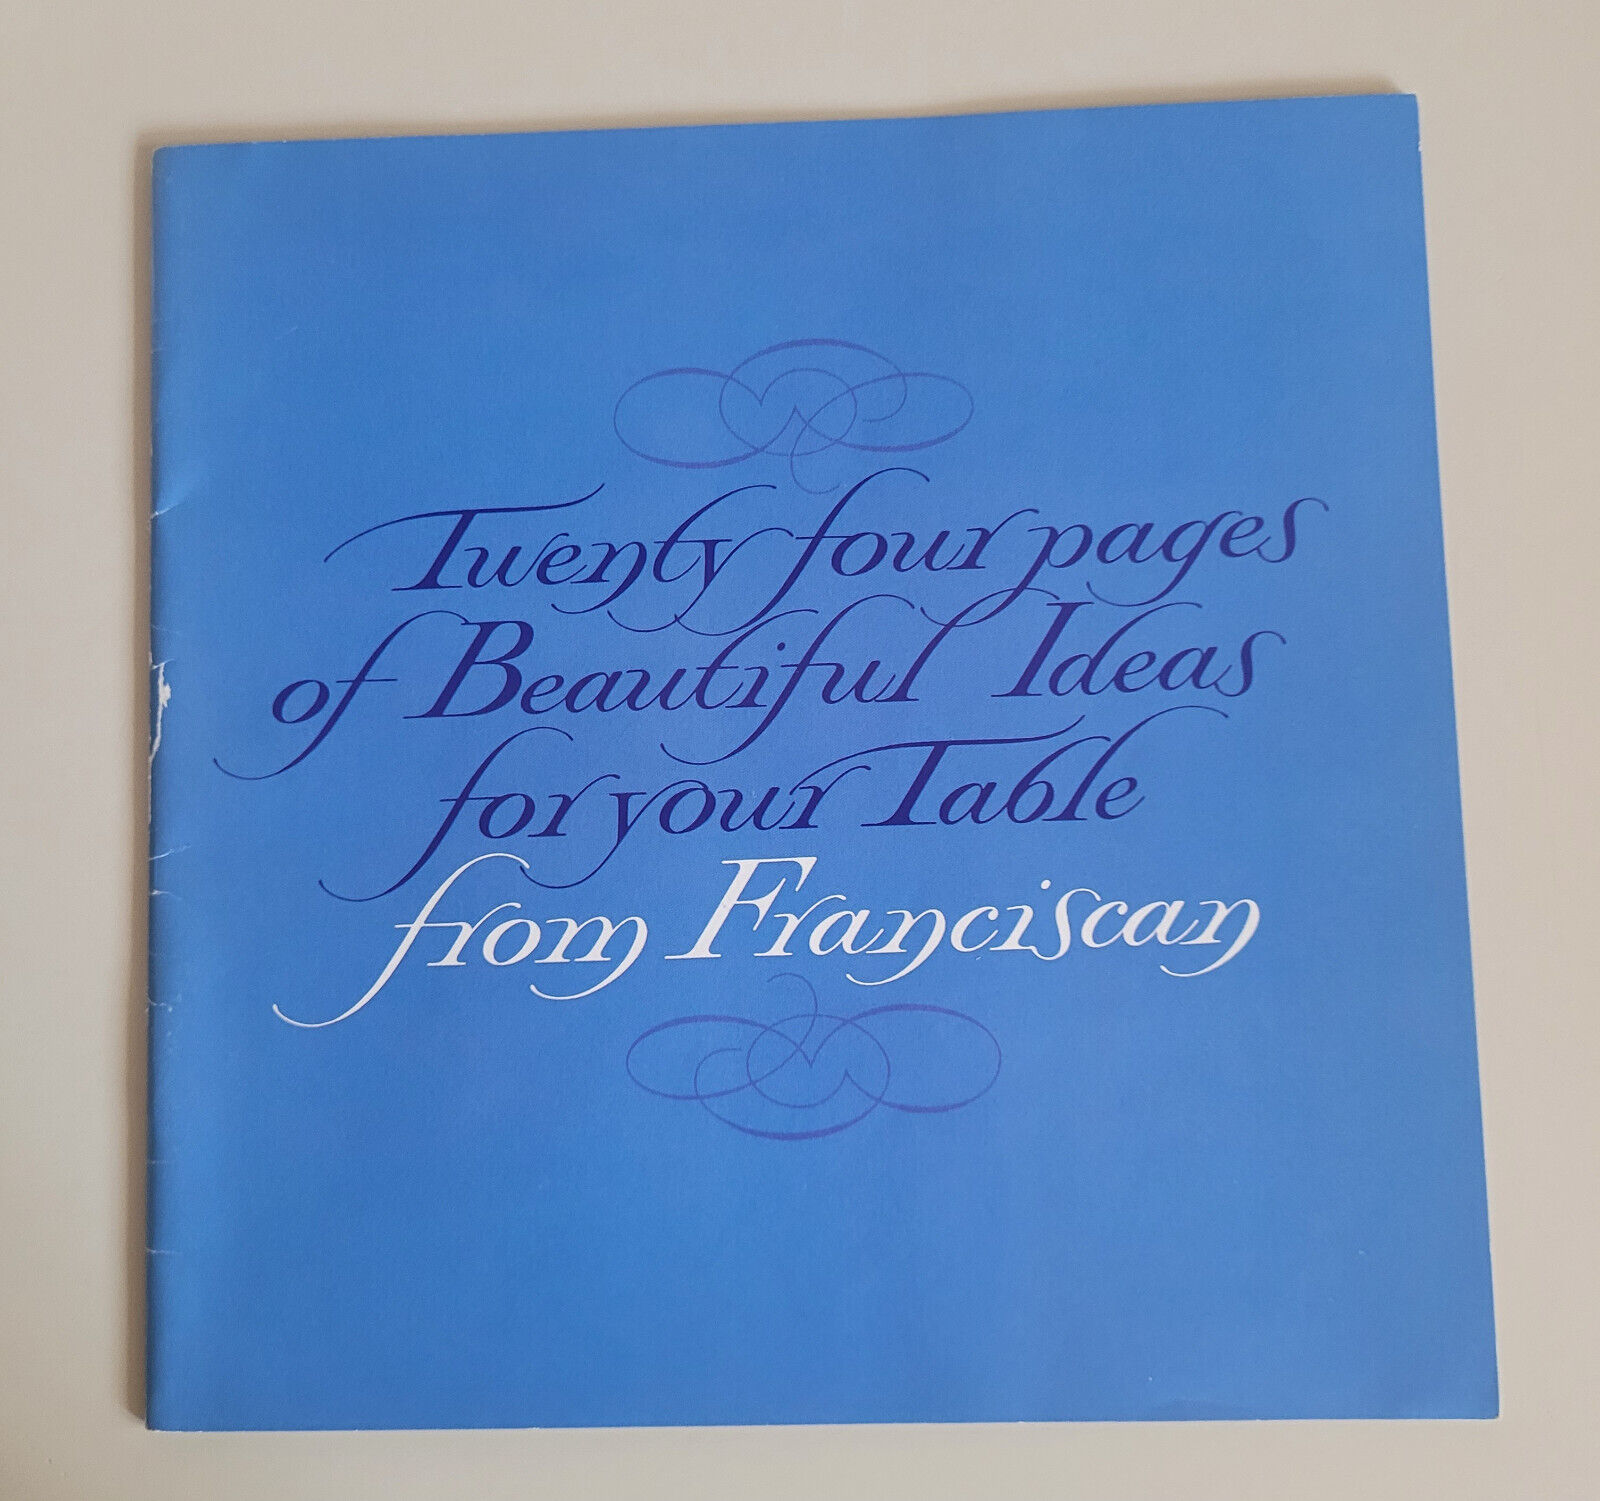 Franciscan Ware 1972 Beautiful Ideas for Your Table Brochure